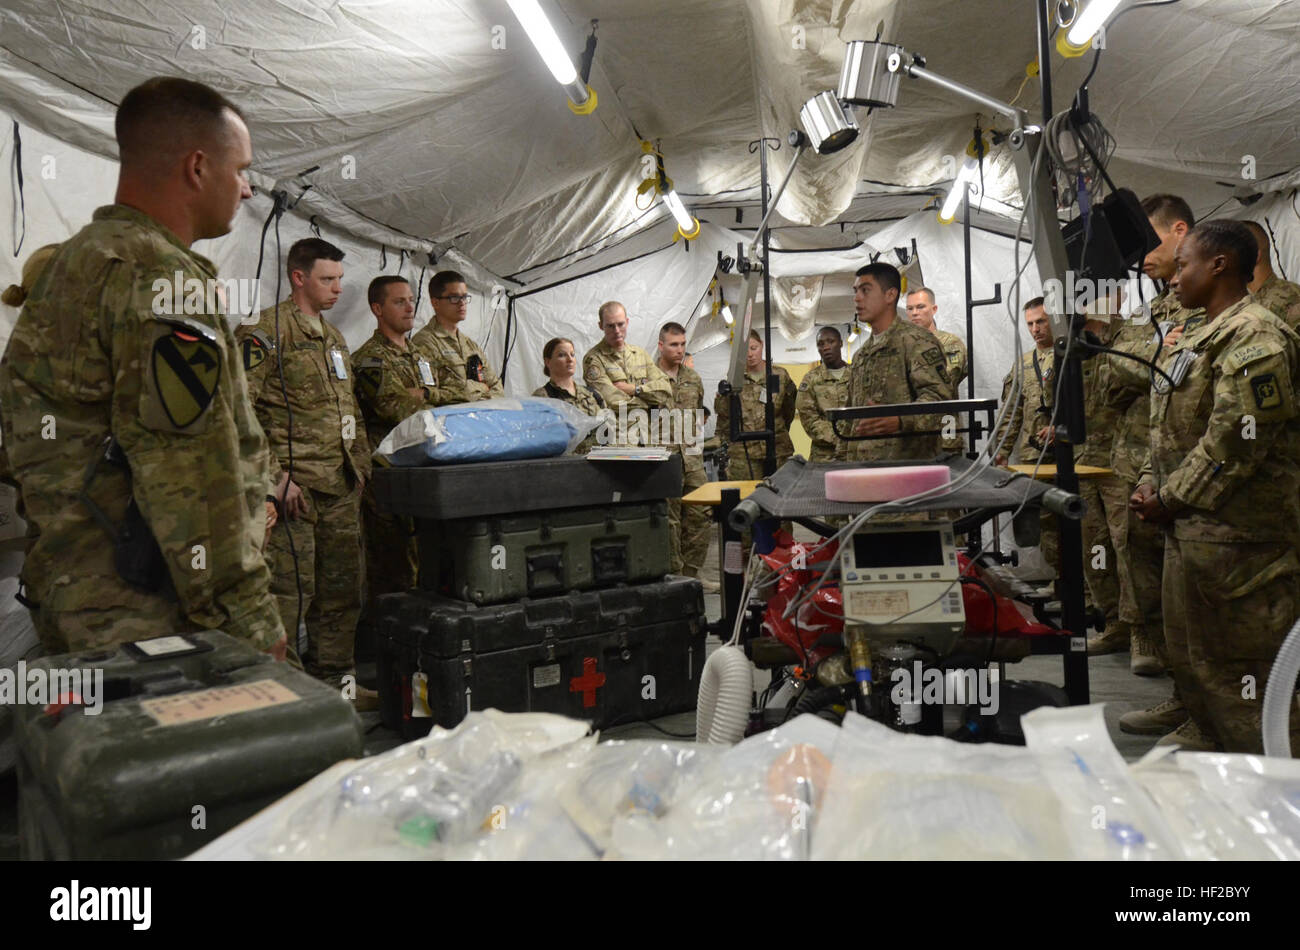 Spc. Daniel Soto, an operating room technician with the 250th Forward Surgical Team from Joint Base Lewis-McChord, Wash., gives a tour of the operating room in the FST's mobile hospital tent to a group of Soldiers from Regional Command-South at Kandahar Airfield, Afghanistan, July 30, 2014. The tour was to give visitors a better idea of the operational capabilities of the FST. (U.S. Army photo by Staff Sgt. John Etheridge) 250th FST sets up portable hospital to demonstrate lifesaving capabilities 140730-Z-BQ261-048 Stock Photo